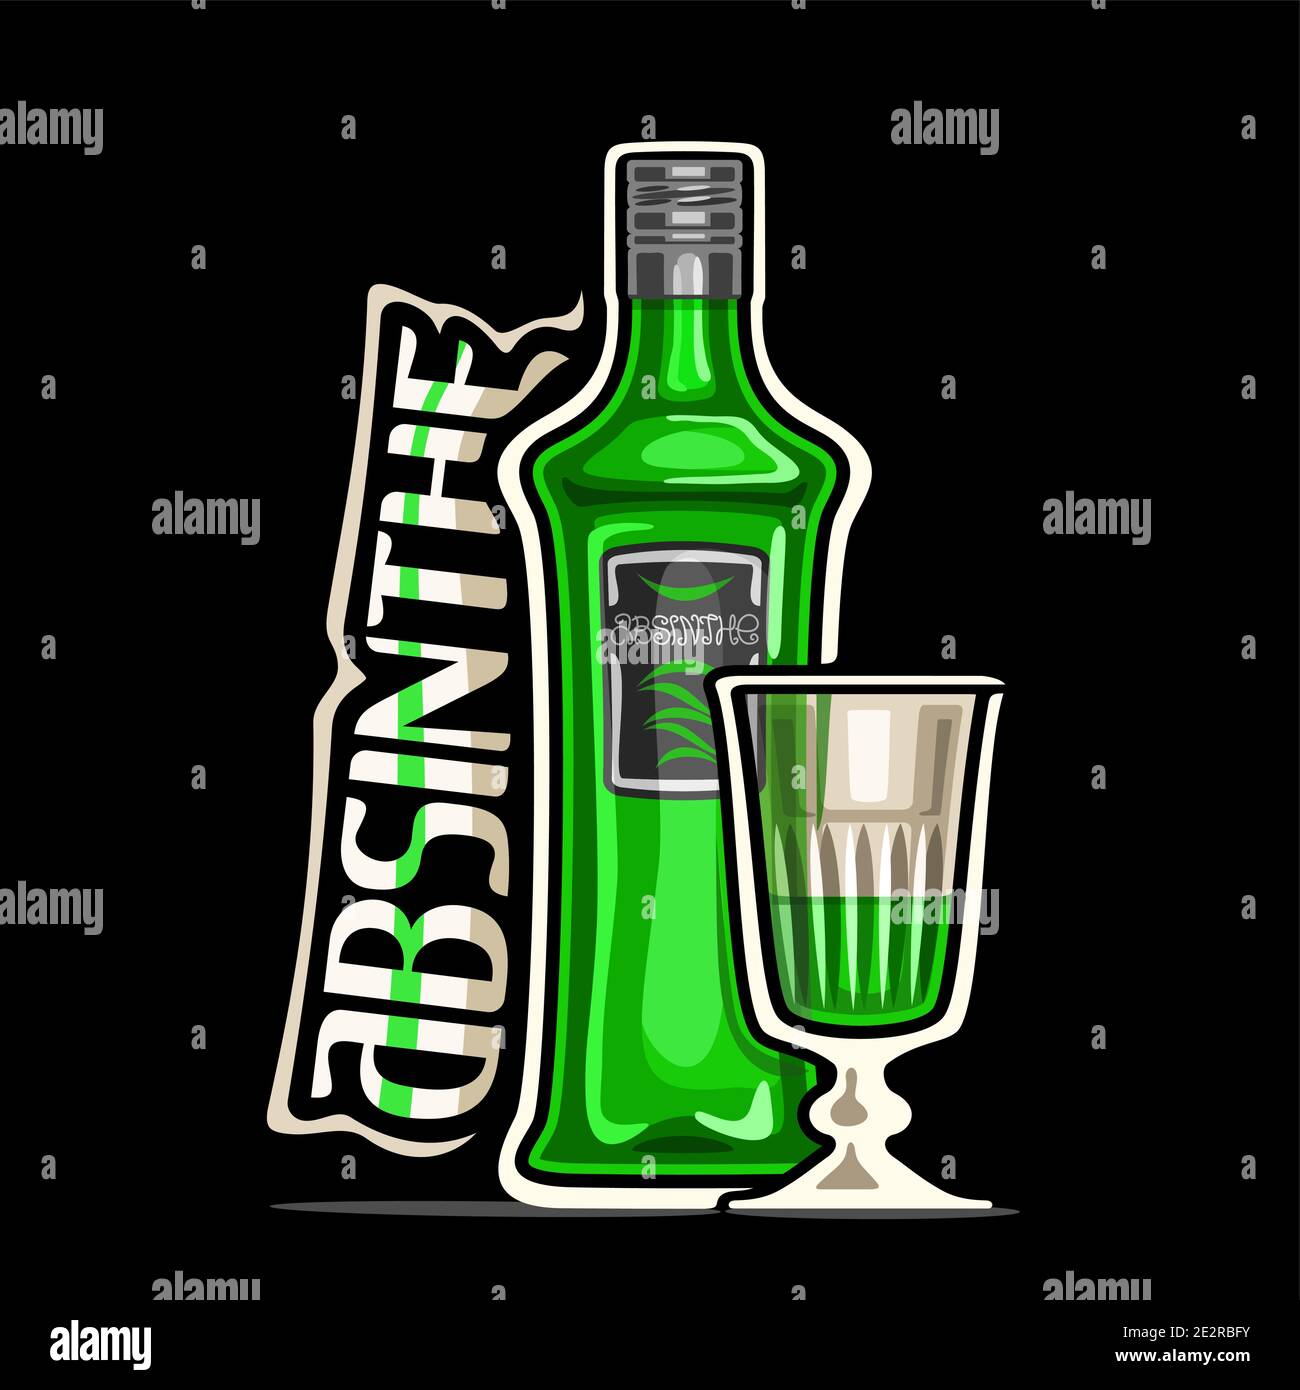 Vector logo for Absinthe, outline illustration of green classic bottle with decorative label and half full cartoon cordial glass, square placard with Stock Vector